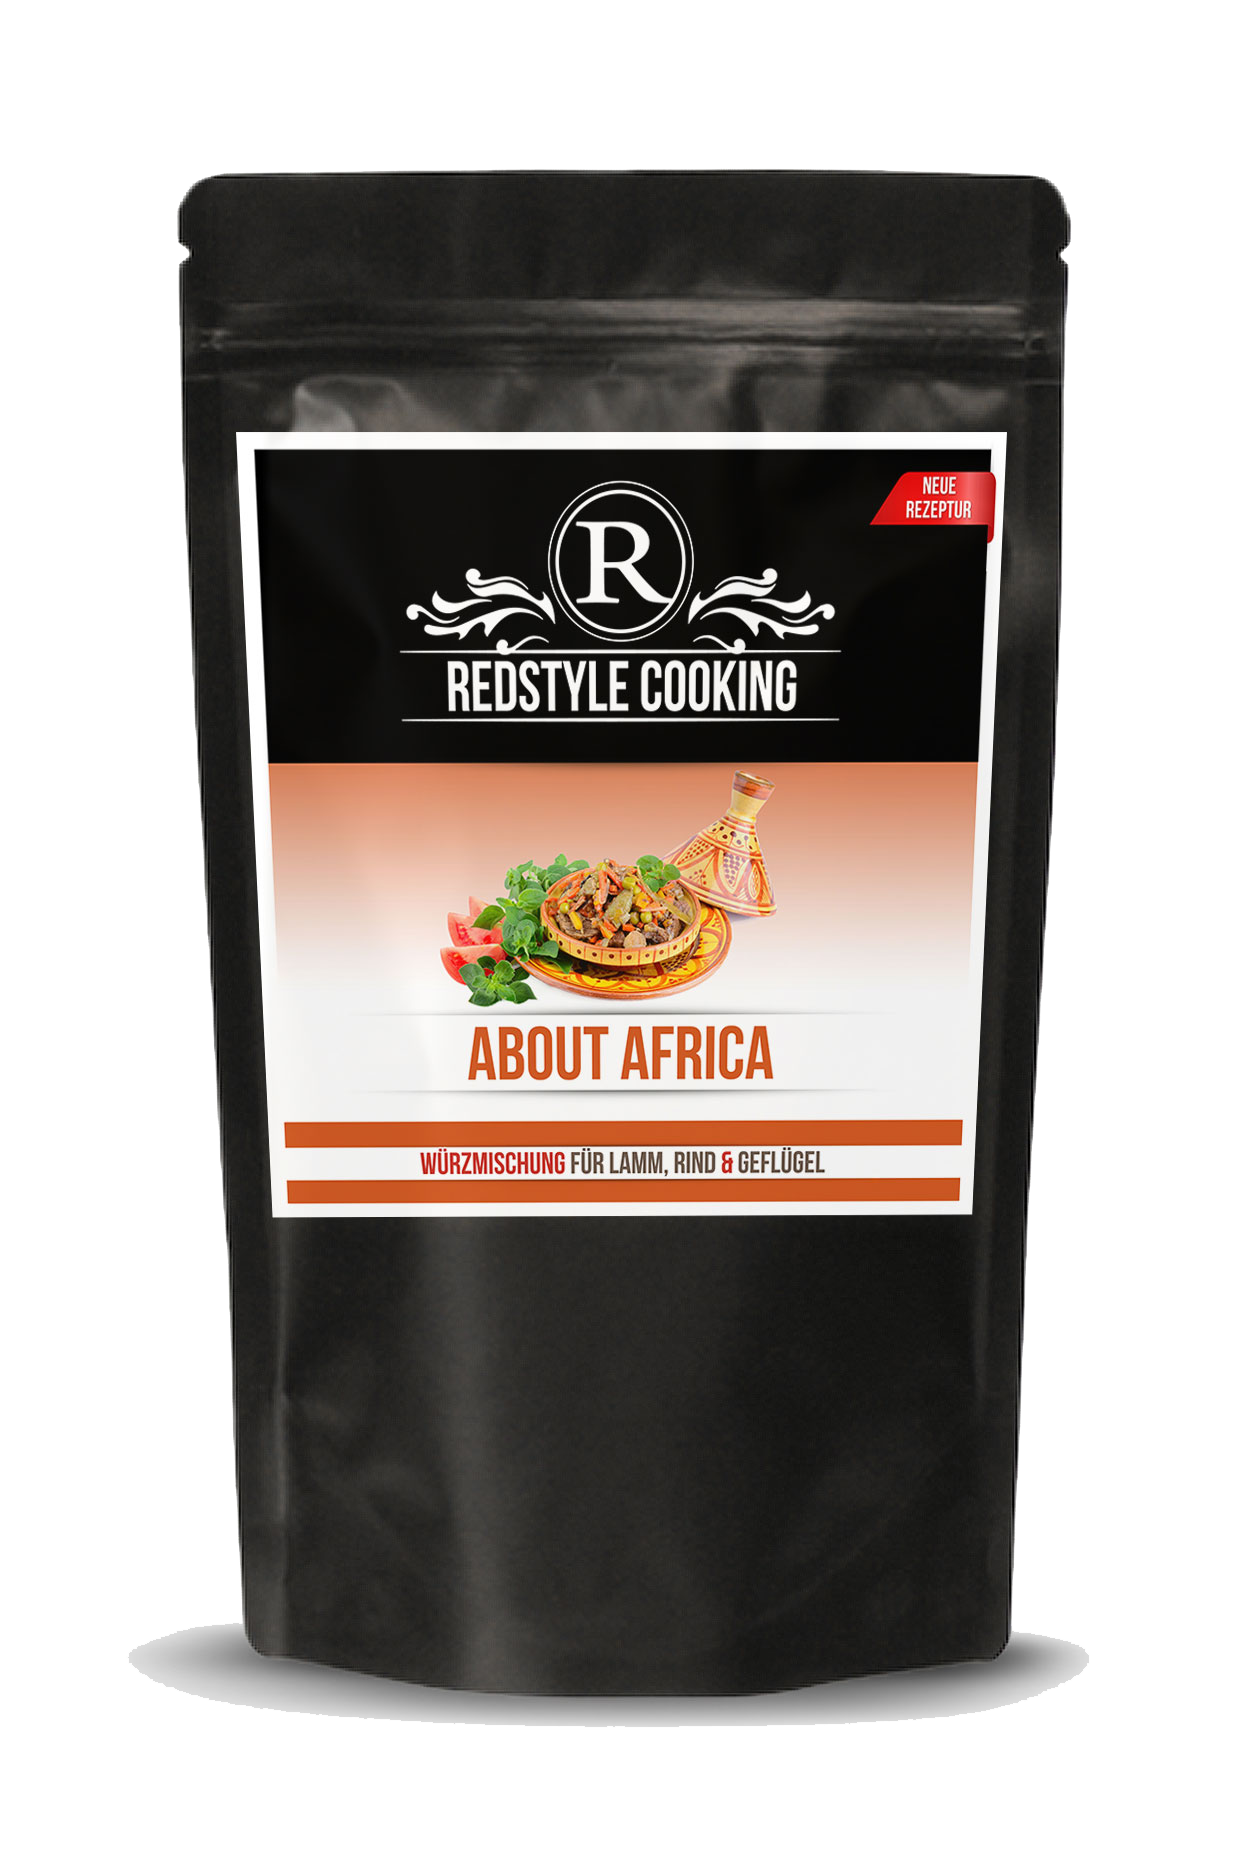 About Africa, Redstyle Cooking